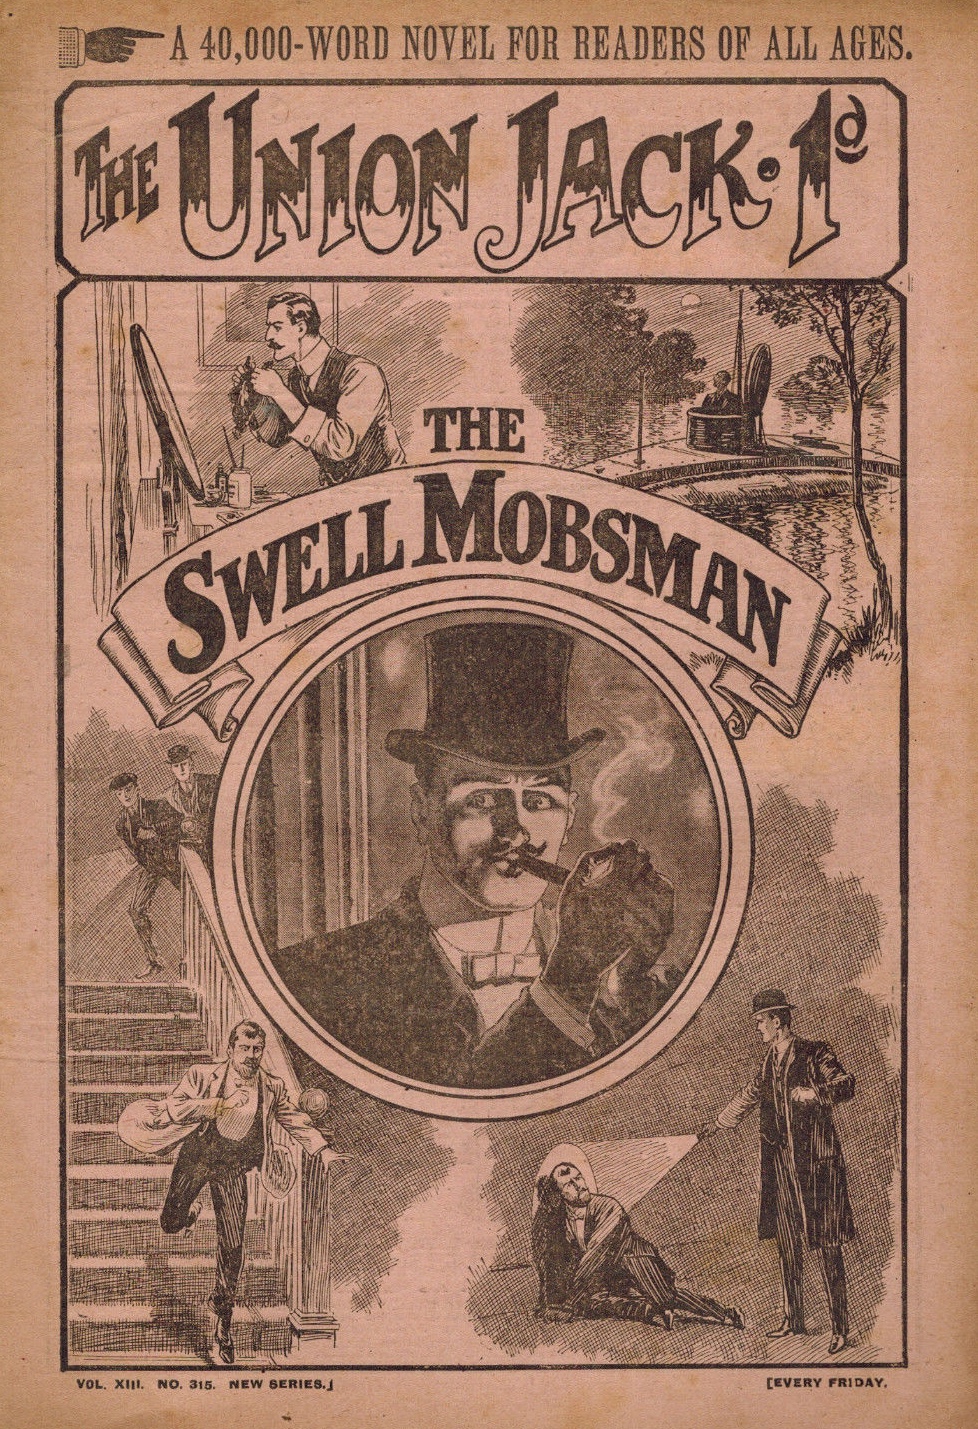 THE SWELL MOBSMAN